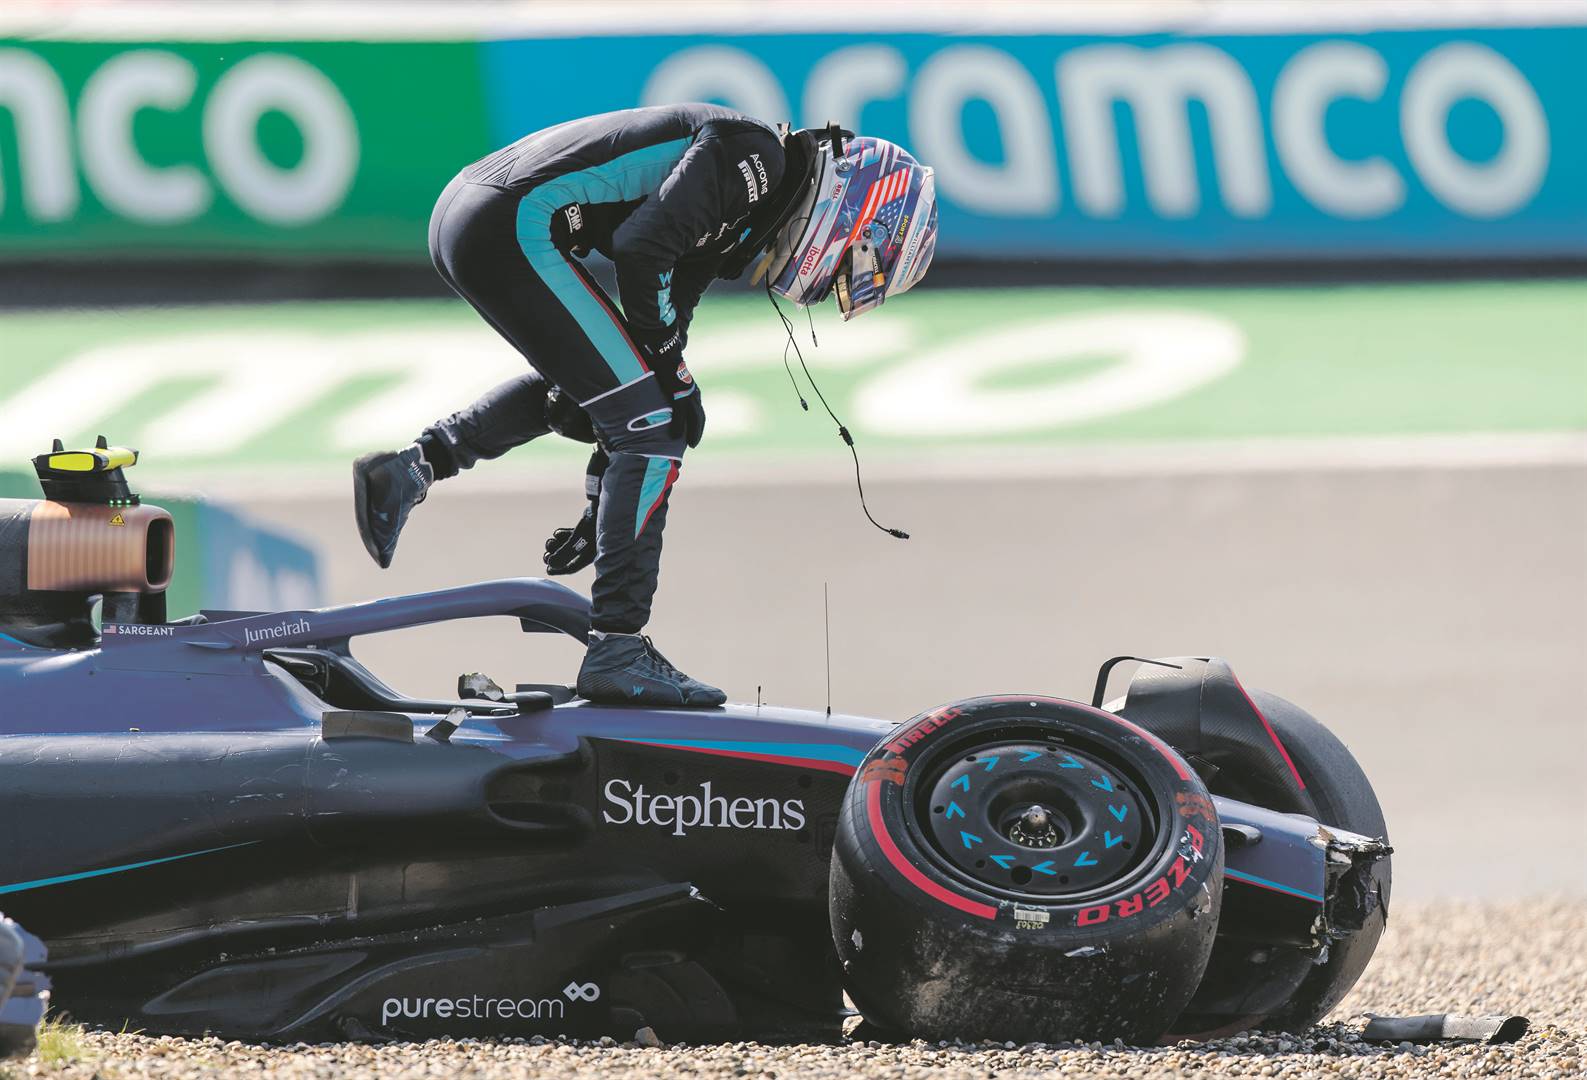  Williams Racing driver Logan Sargeant emerges from his car after a crash during qualifying for the Dutch Grand Prix last month Photo : ANP / Getty Images